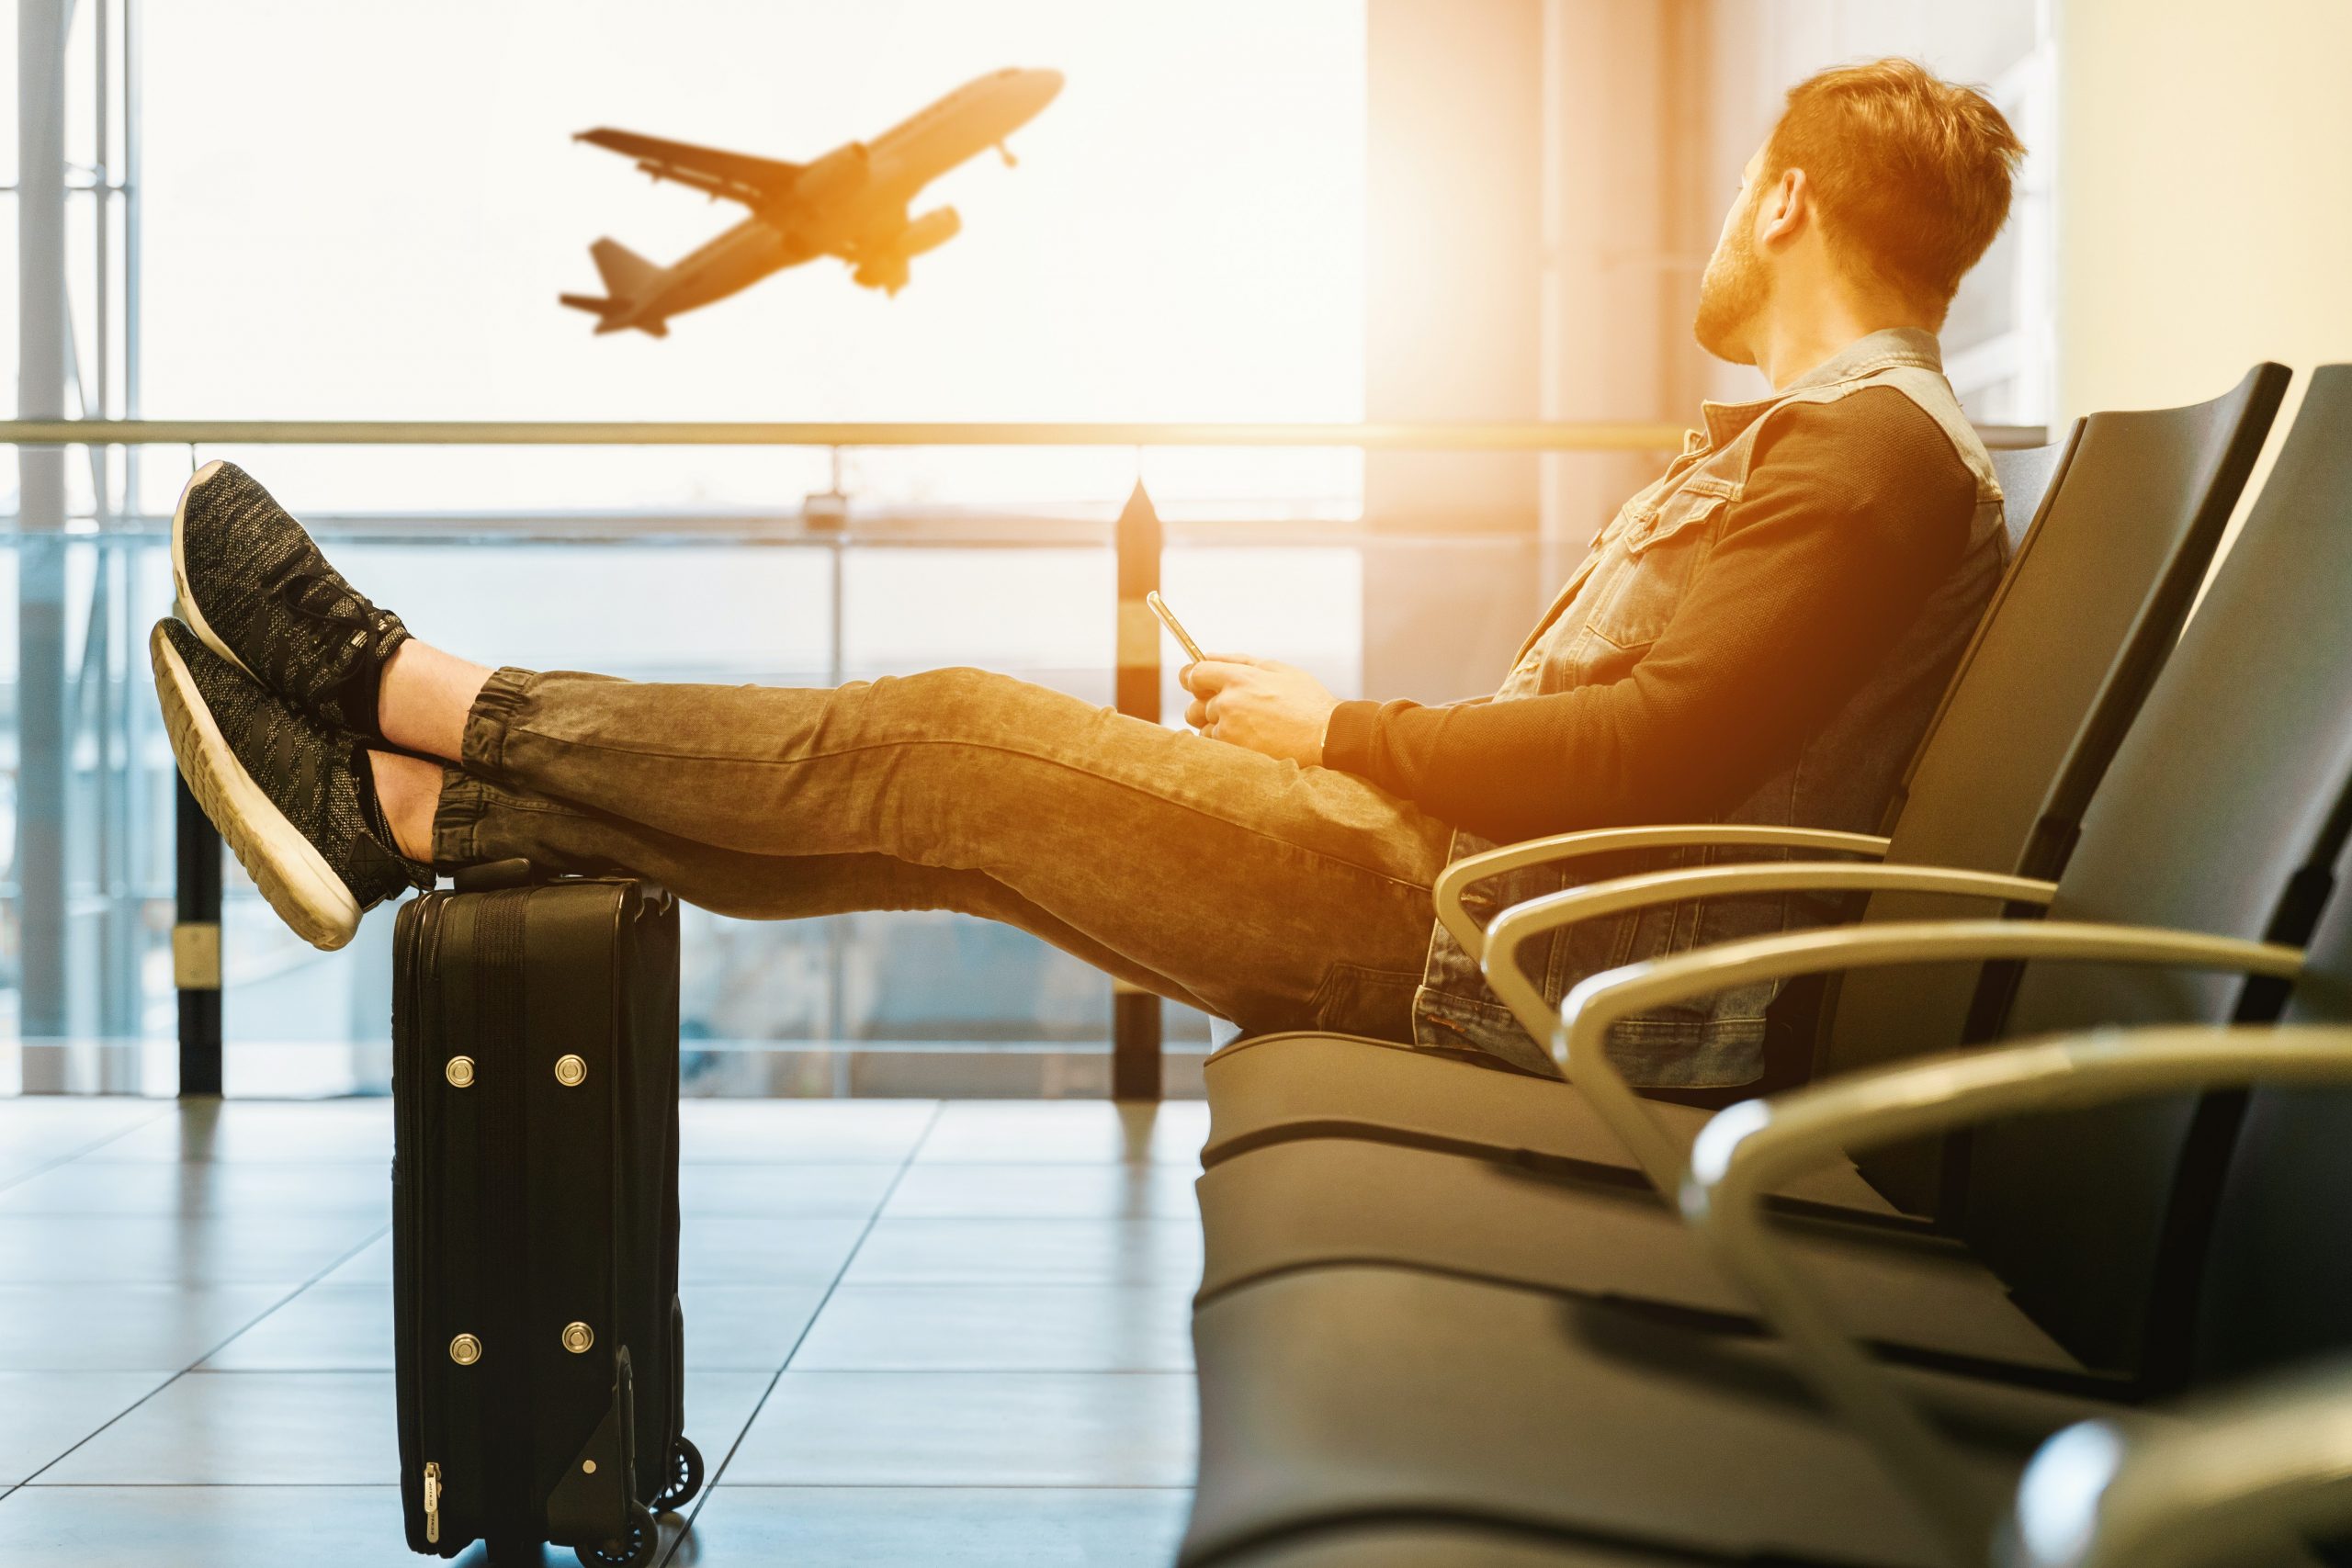 Staying Safe When Travelling Alone